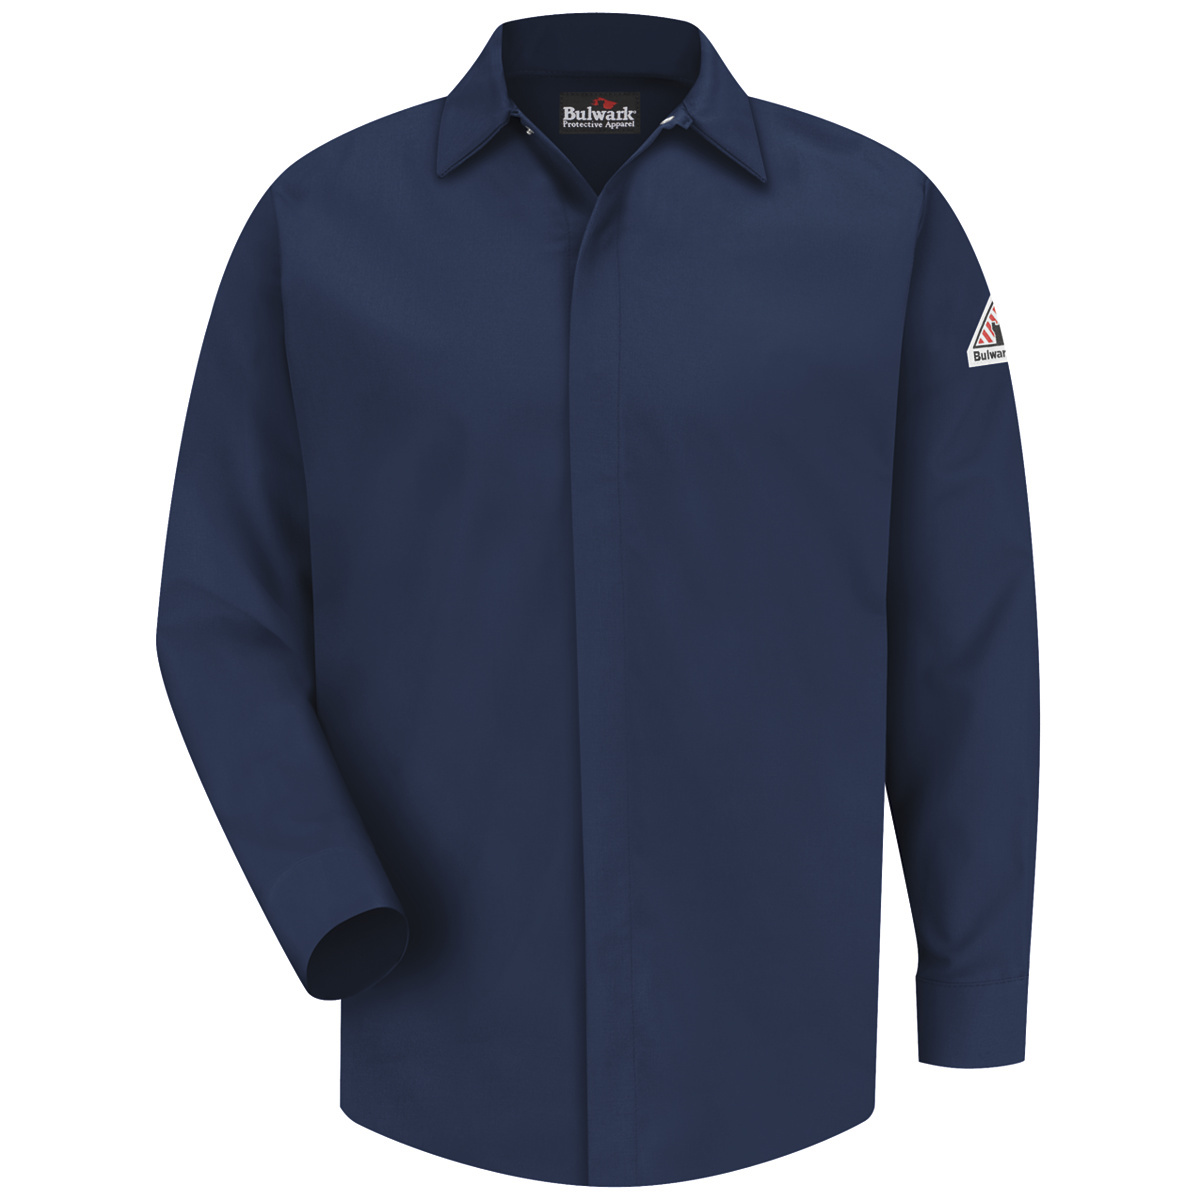 Bulwark® X-Large Tall Navy Blue CoolTouch®/Modacrylic/Lyocell/Aramid Flame Resistant Work Shirt With Gripper Front Closure